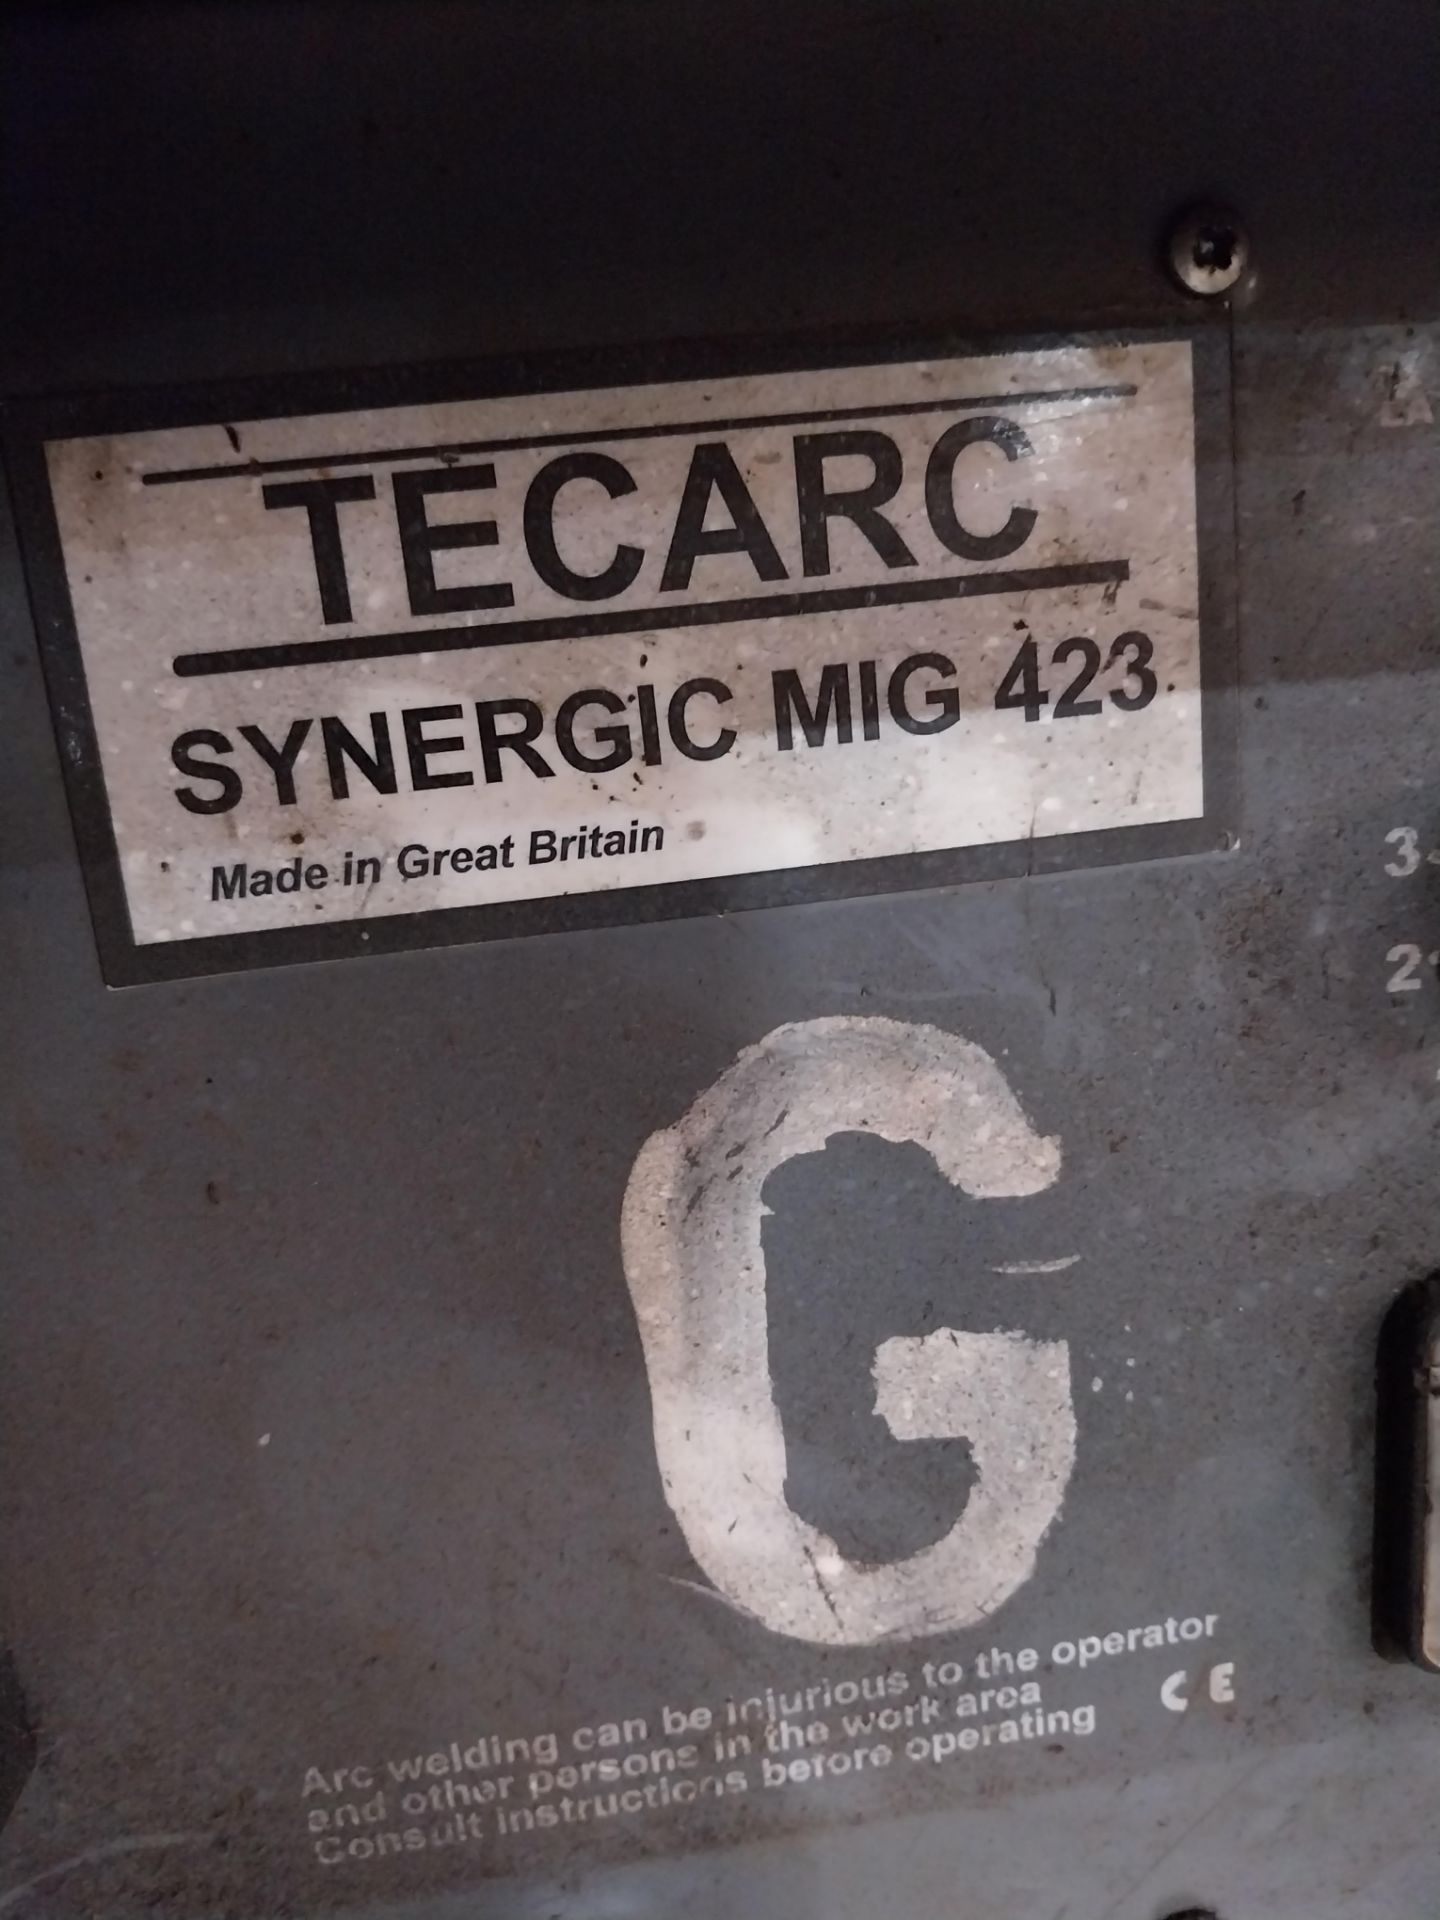 TecArc Synergic mig 423 mig welder on trolley (bottle not included) - Image 3 of 5